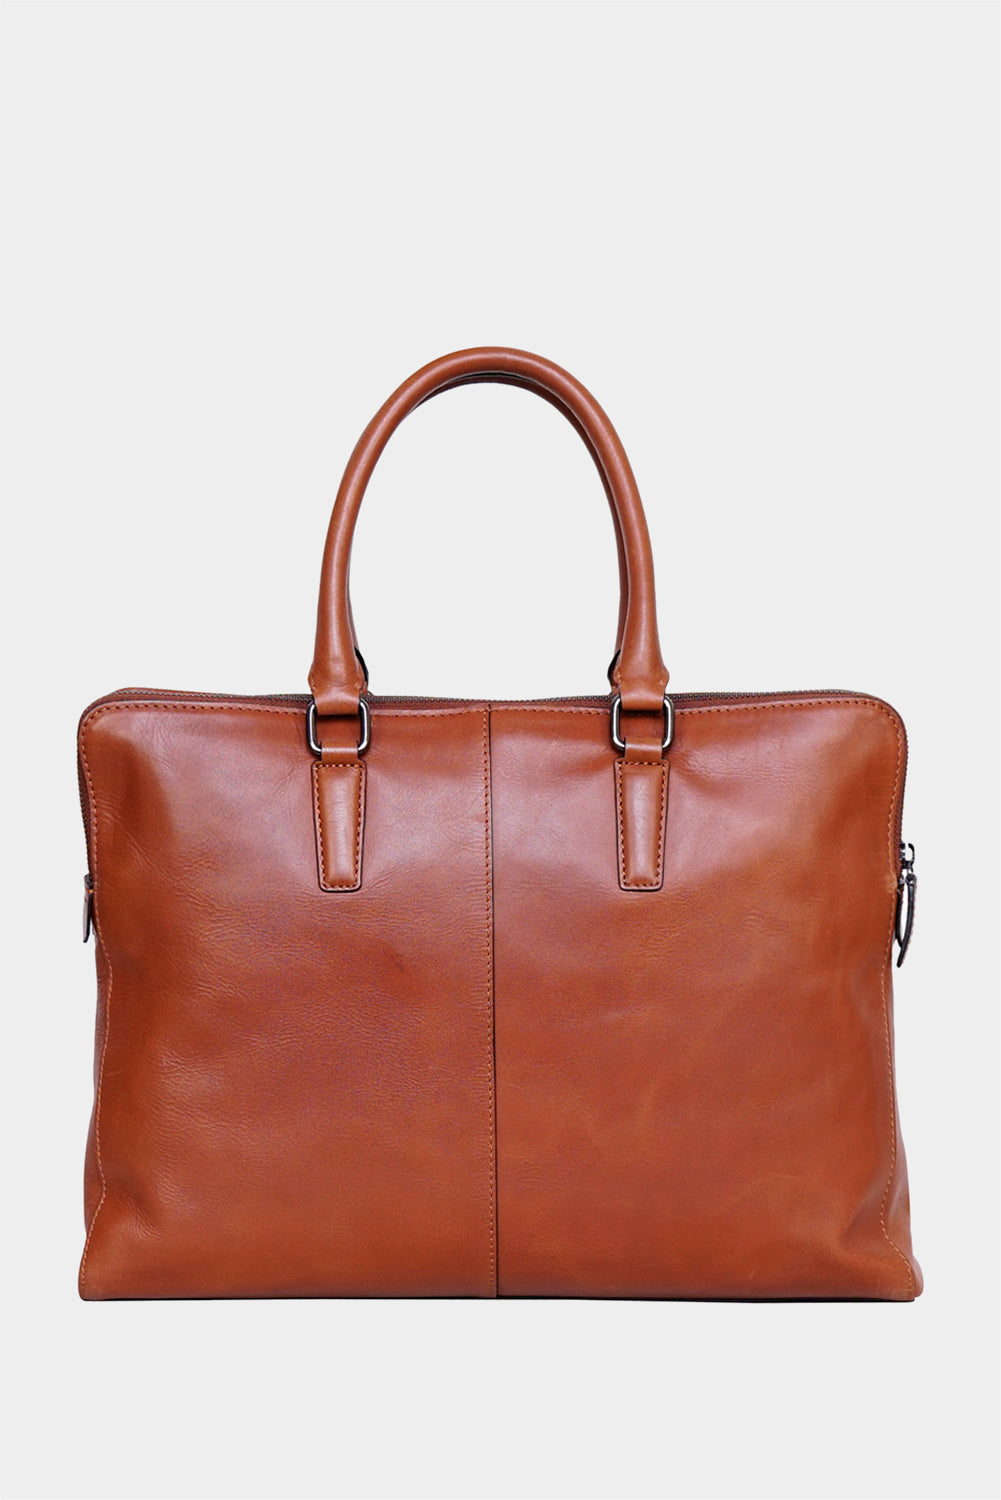 Justanned Men Classy Tan Leather Bag